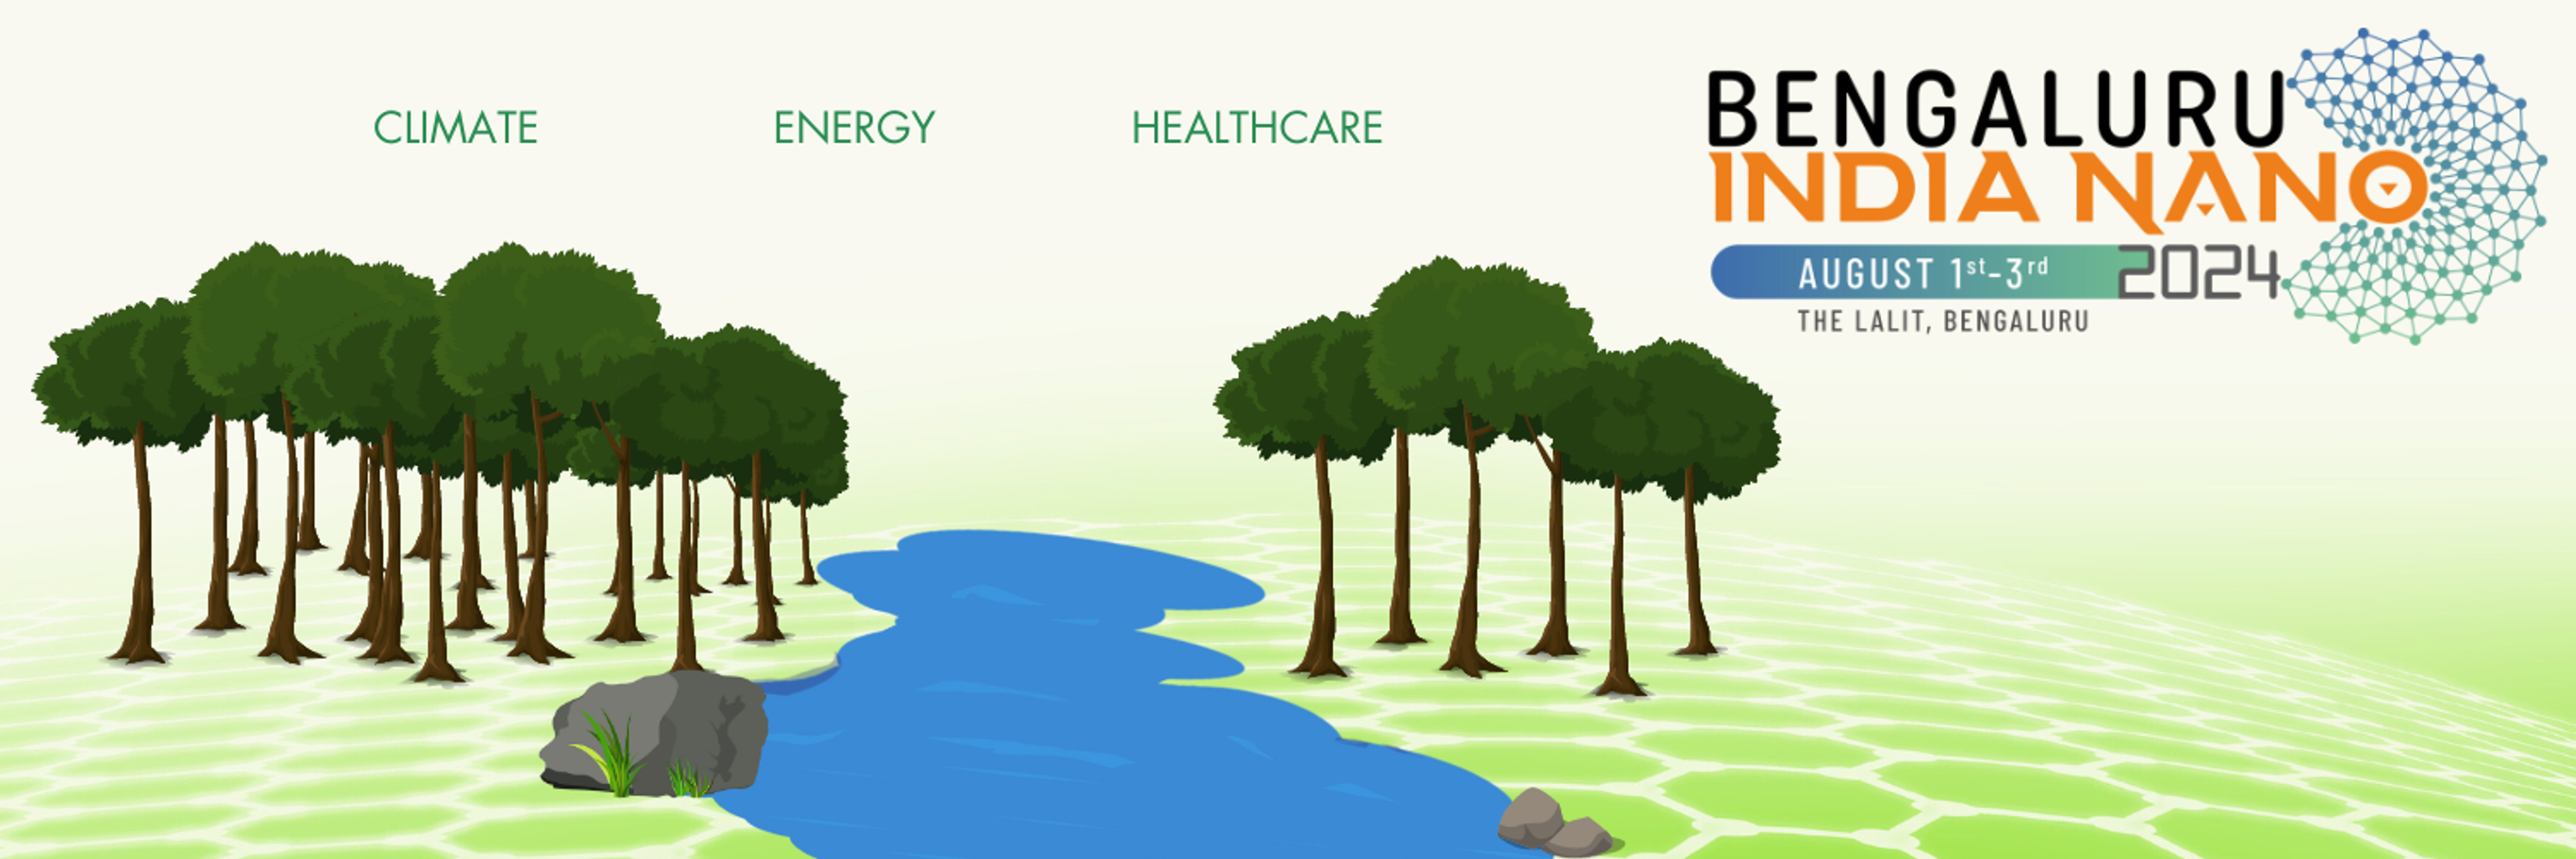 Illustrated banner for Bengaluru India Nano 2024, featuring a river flowing through a forest of trees on a hexagonal patterned ground. Text labels 'Climate,' 'Energy,' and 'Healthcare' appear at the top, while event details 'August 1st-3rd, The Lalit, Bengaluru' are displayed on the right side alongside the event logo.